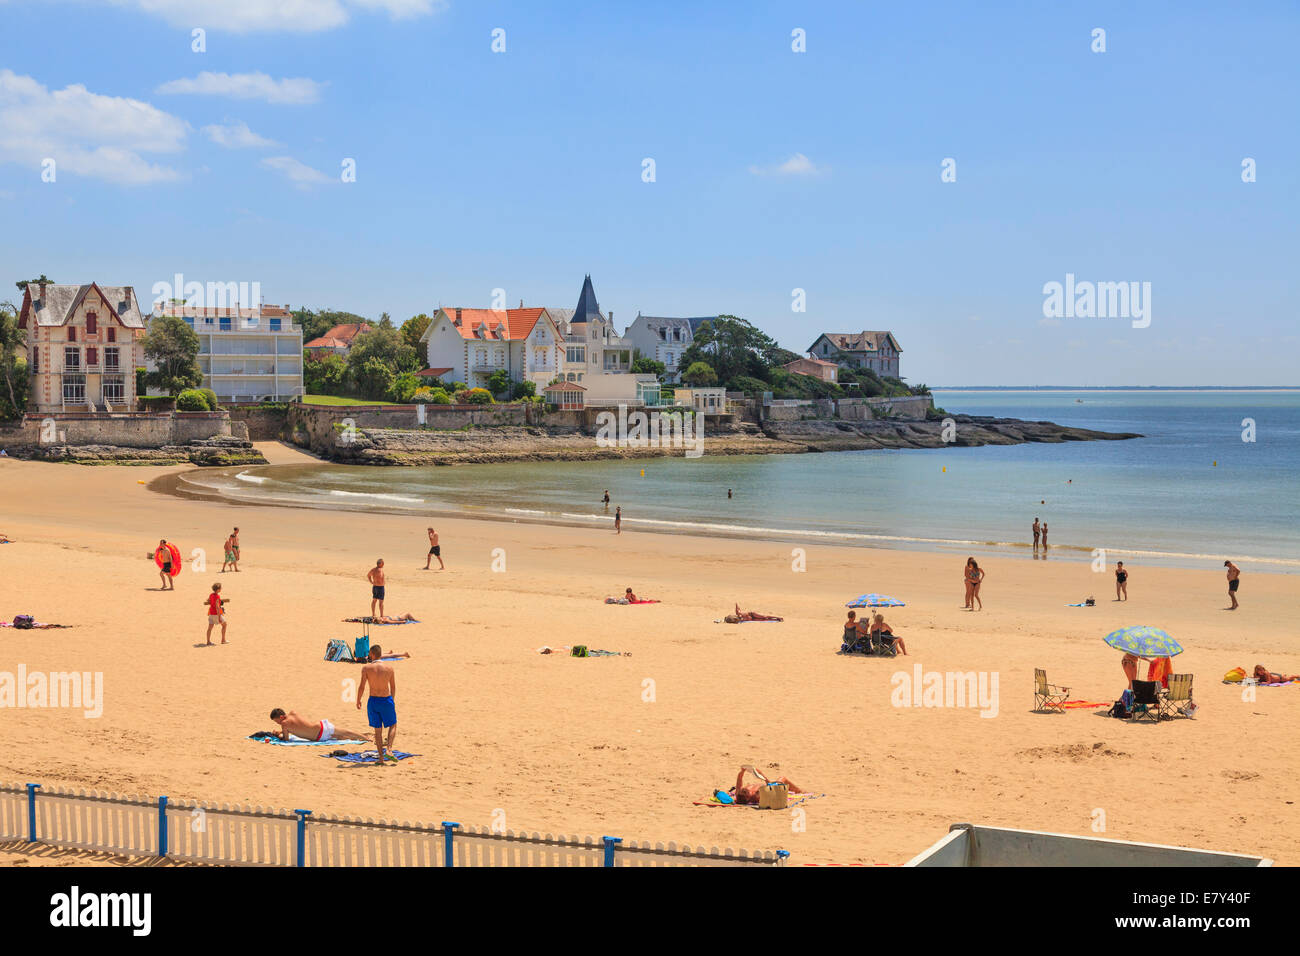 The beach and bay at Saint Palais sur Mer in early summer sunshine. Stock Photo